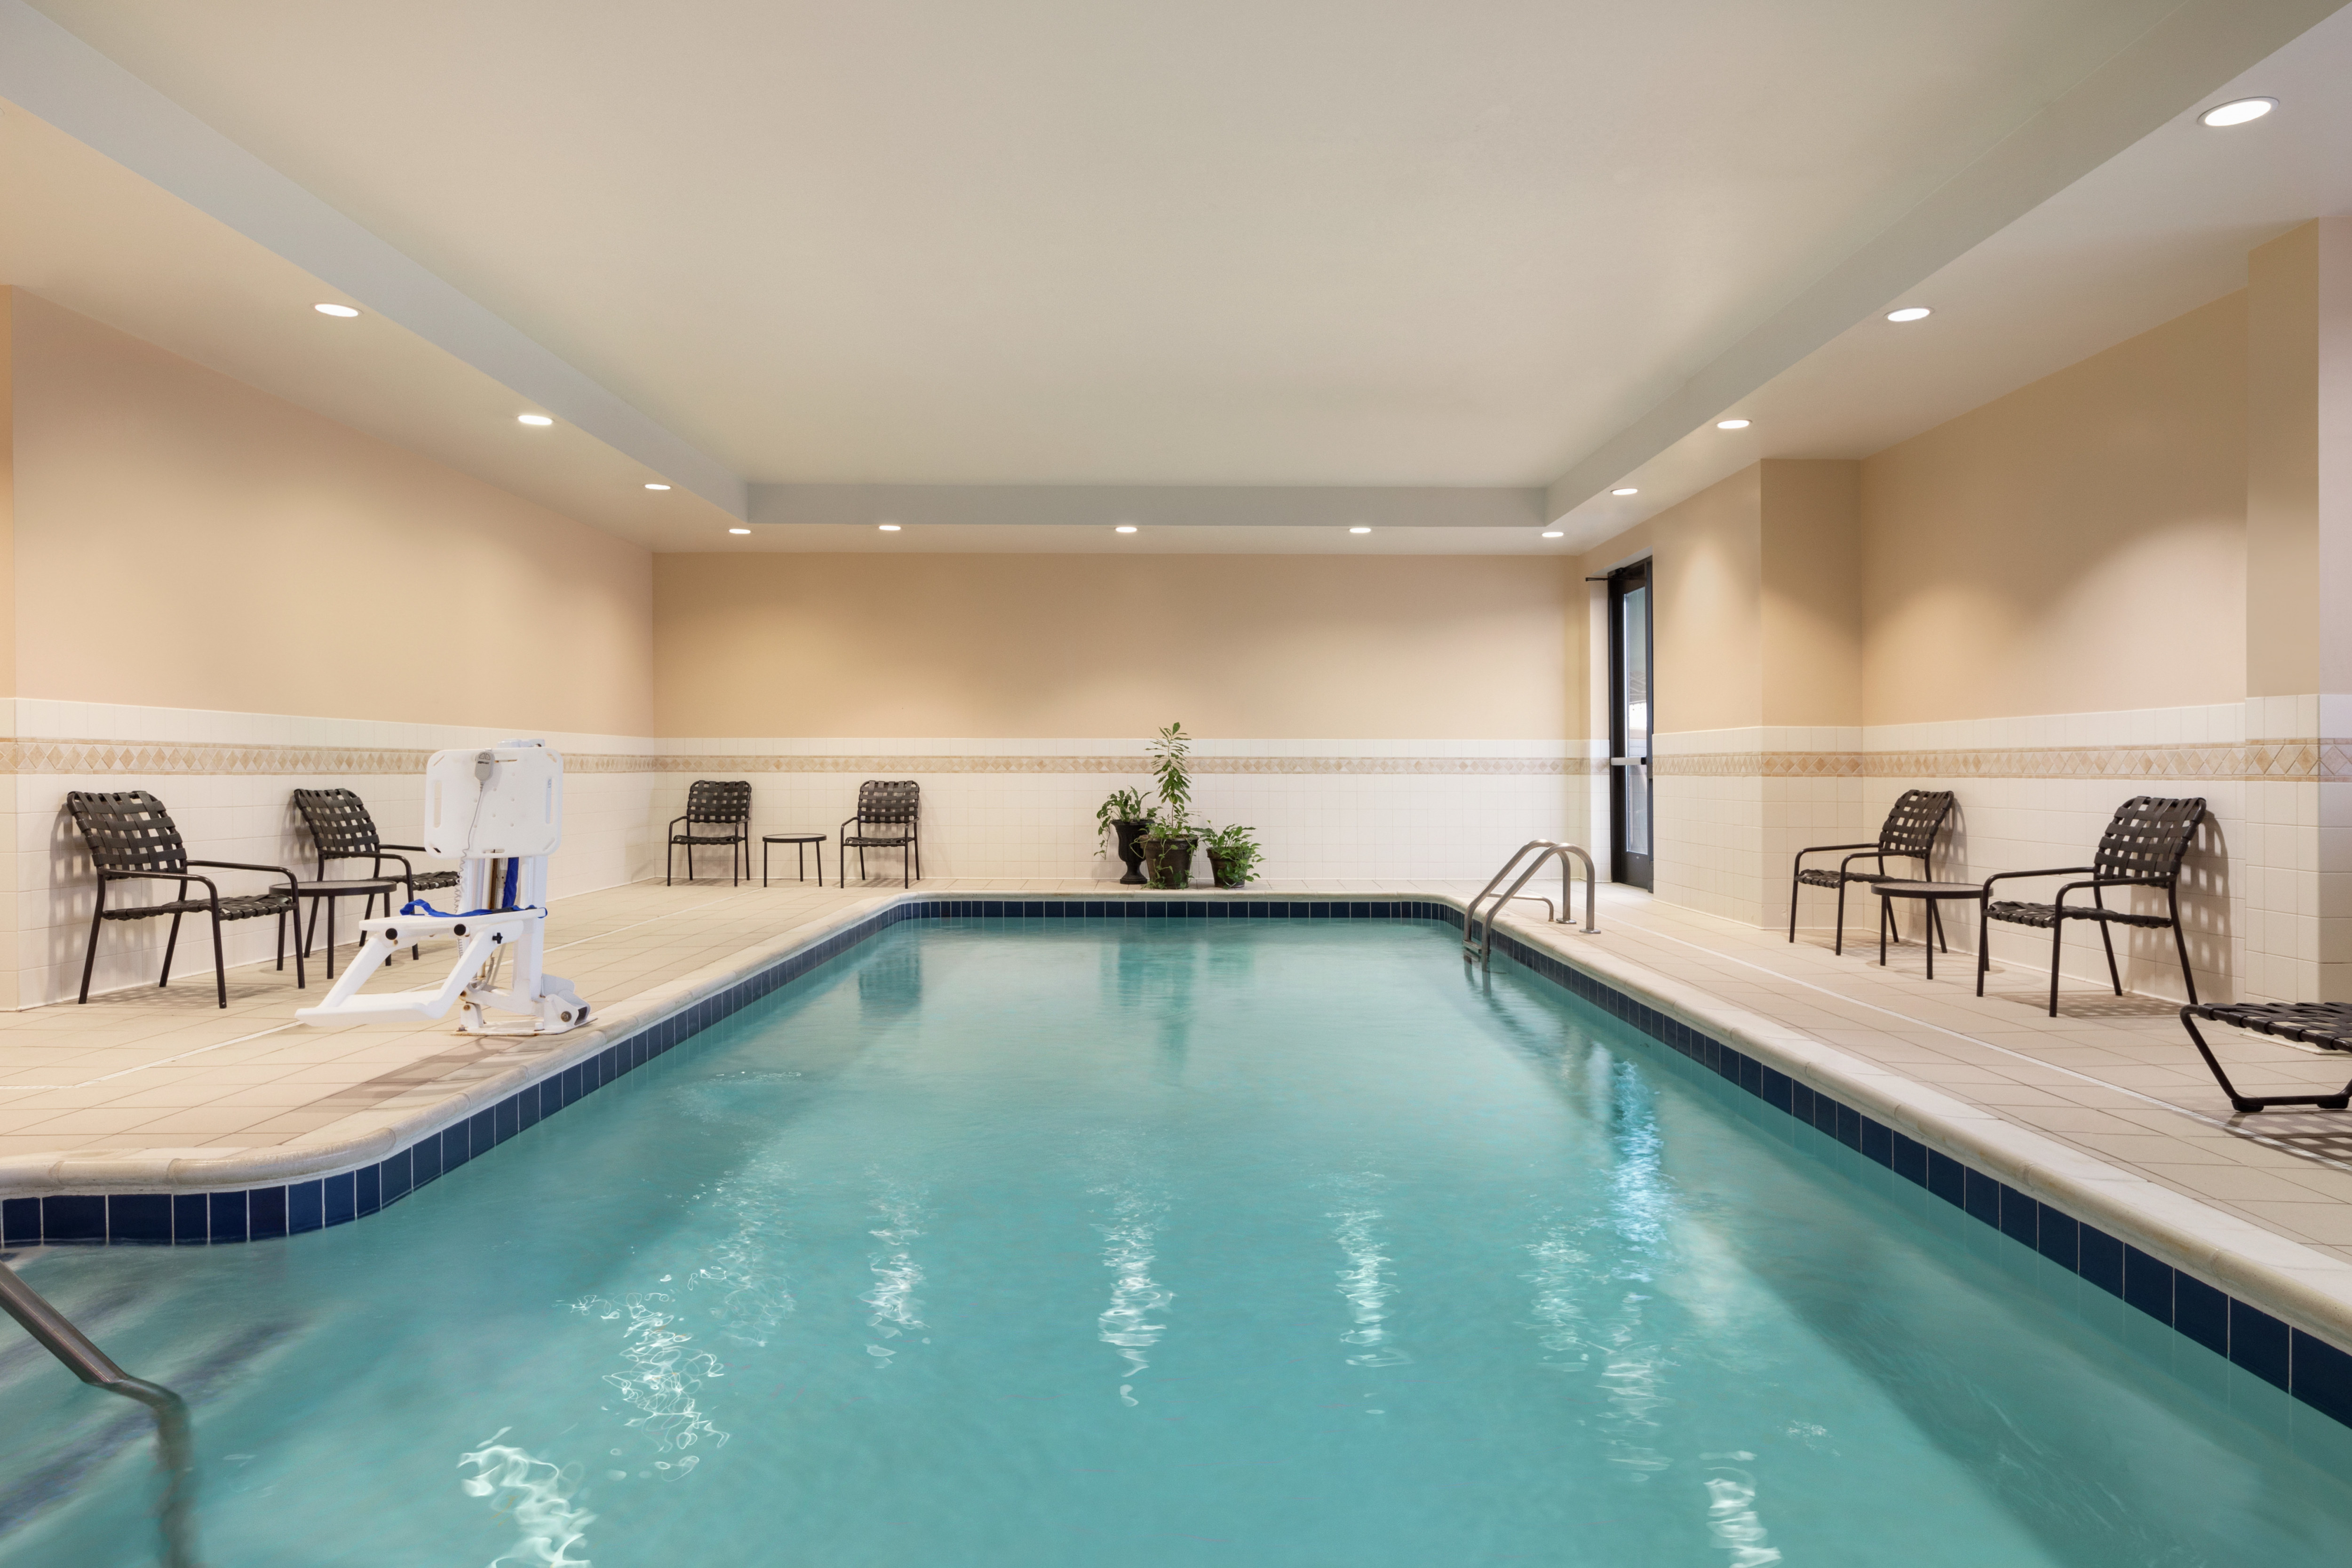 Large indoor swimming pool featuring ample seating, bright lighting, and accessible chair lift.